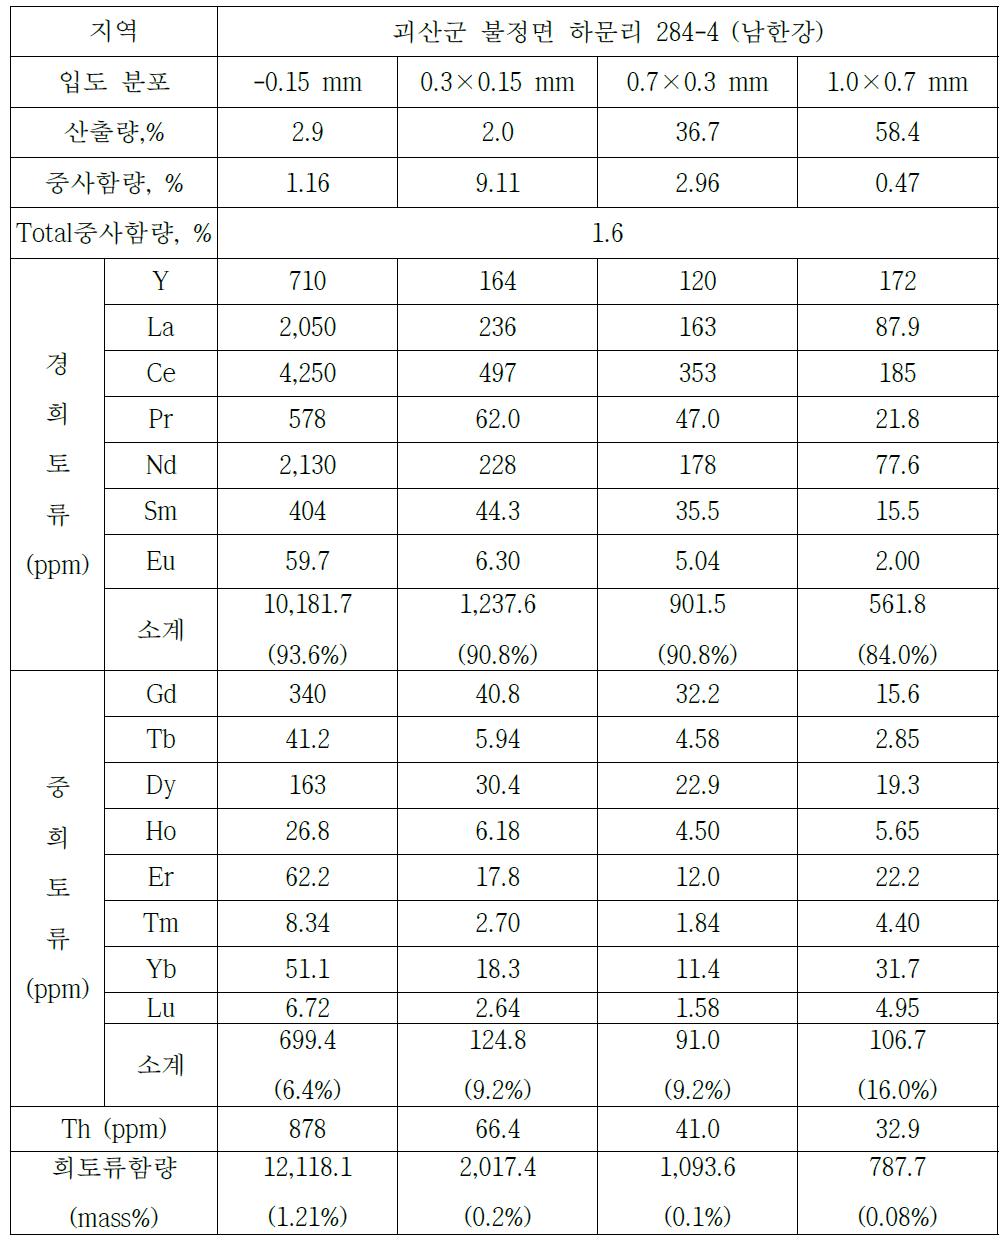 Rare earth element (REE) contents in heavy mineral sand collected from Nanhan River